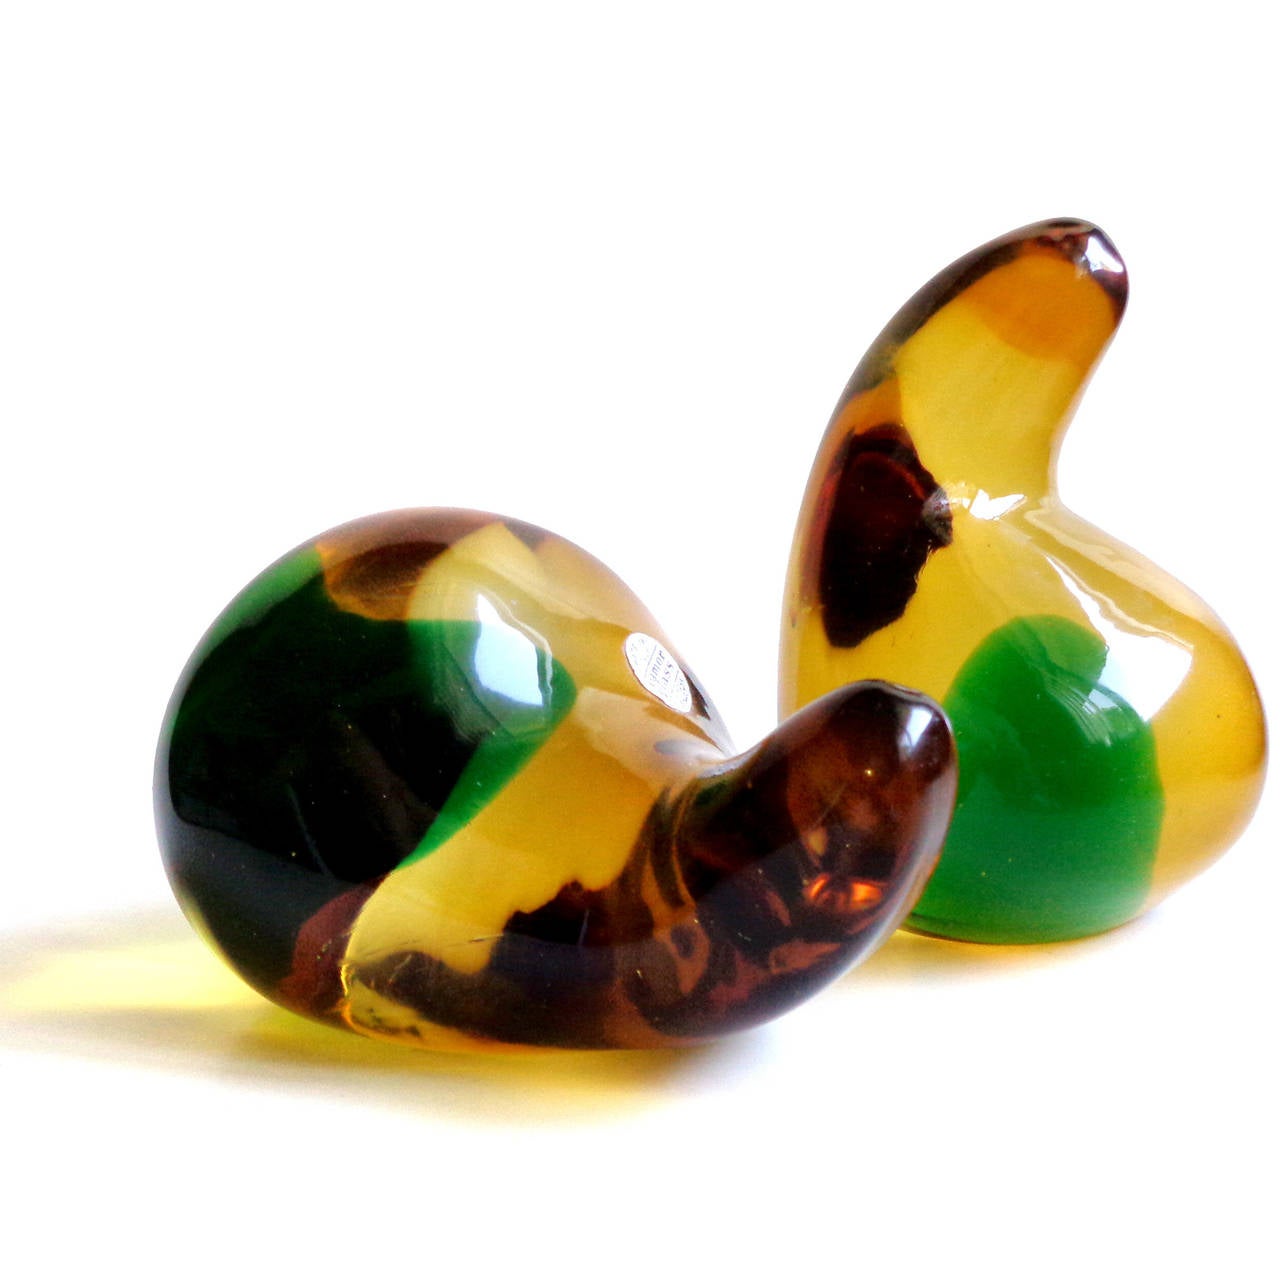 Space Age Murano Sommerso Yellow Orange Green Blob Italian Art Glass Sculpture Bookends